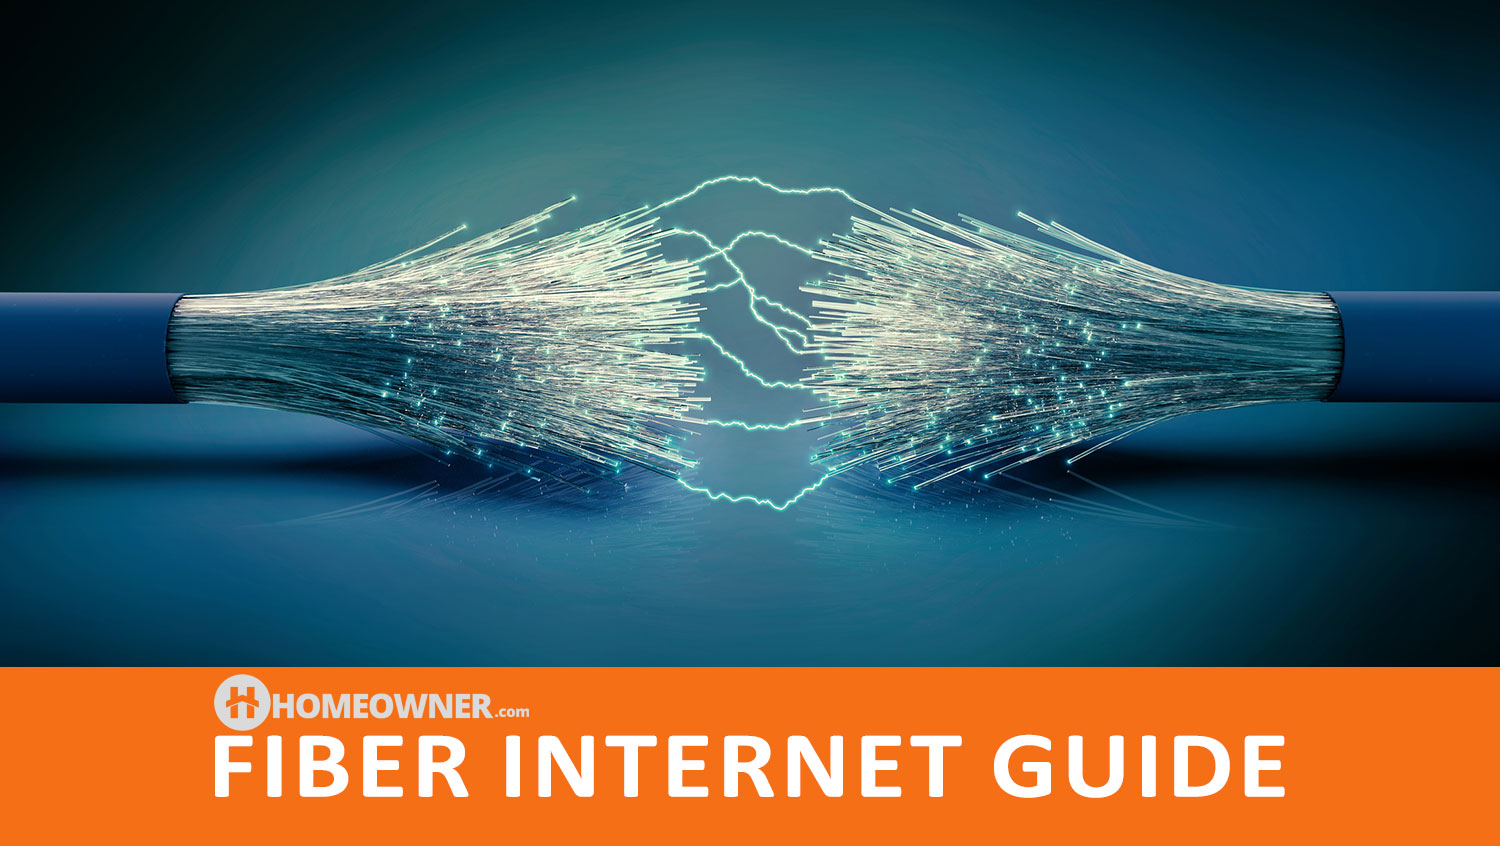 What Is Fiber Internet and How Does It Work?